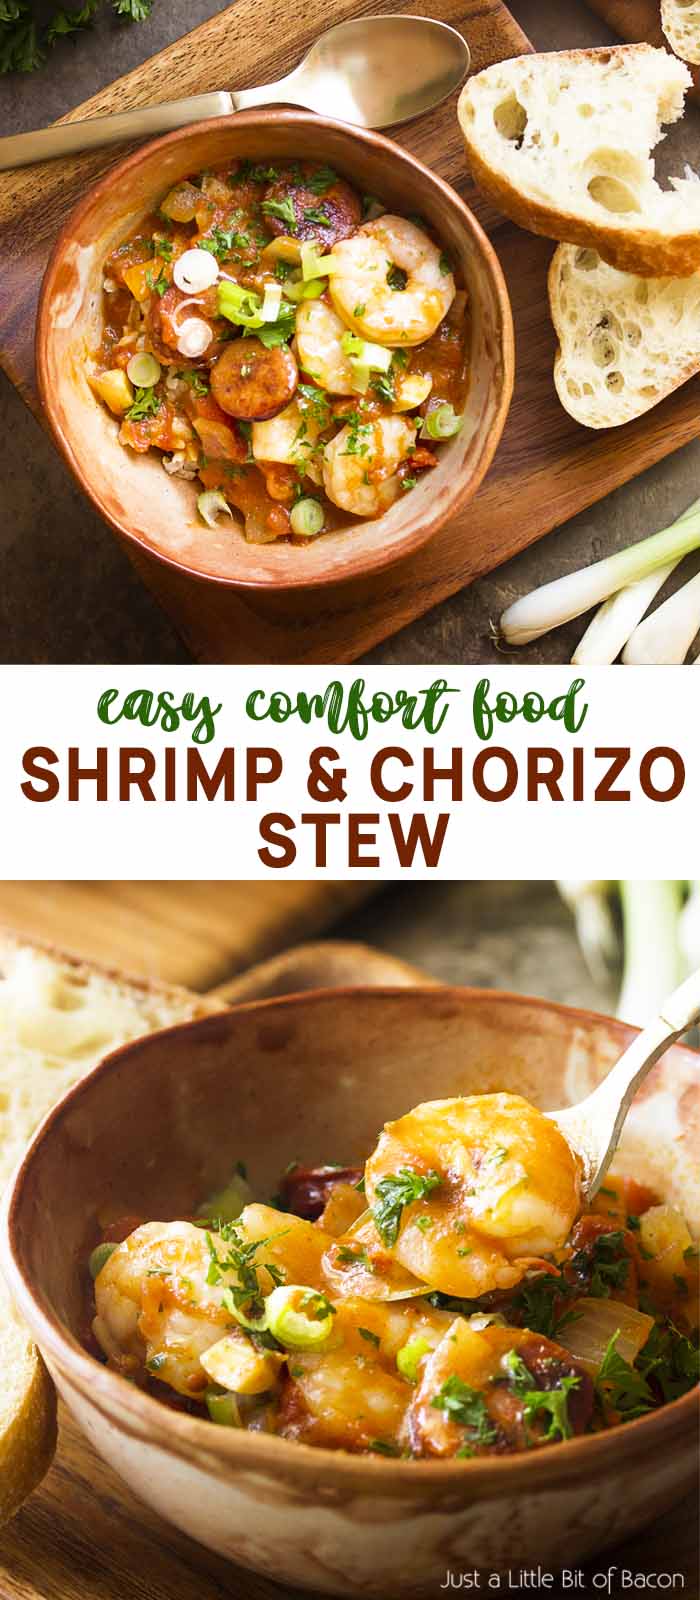 Two views of a bowl of stew with text overlay - Shrimp and Chorizo Stew.